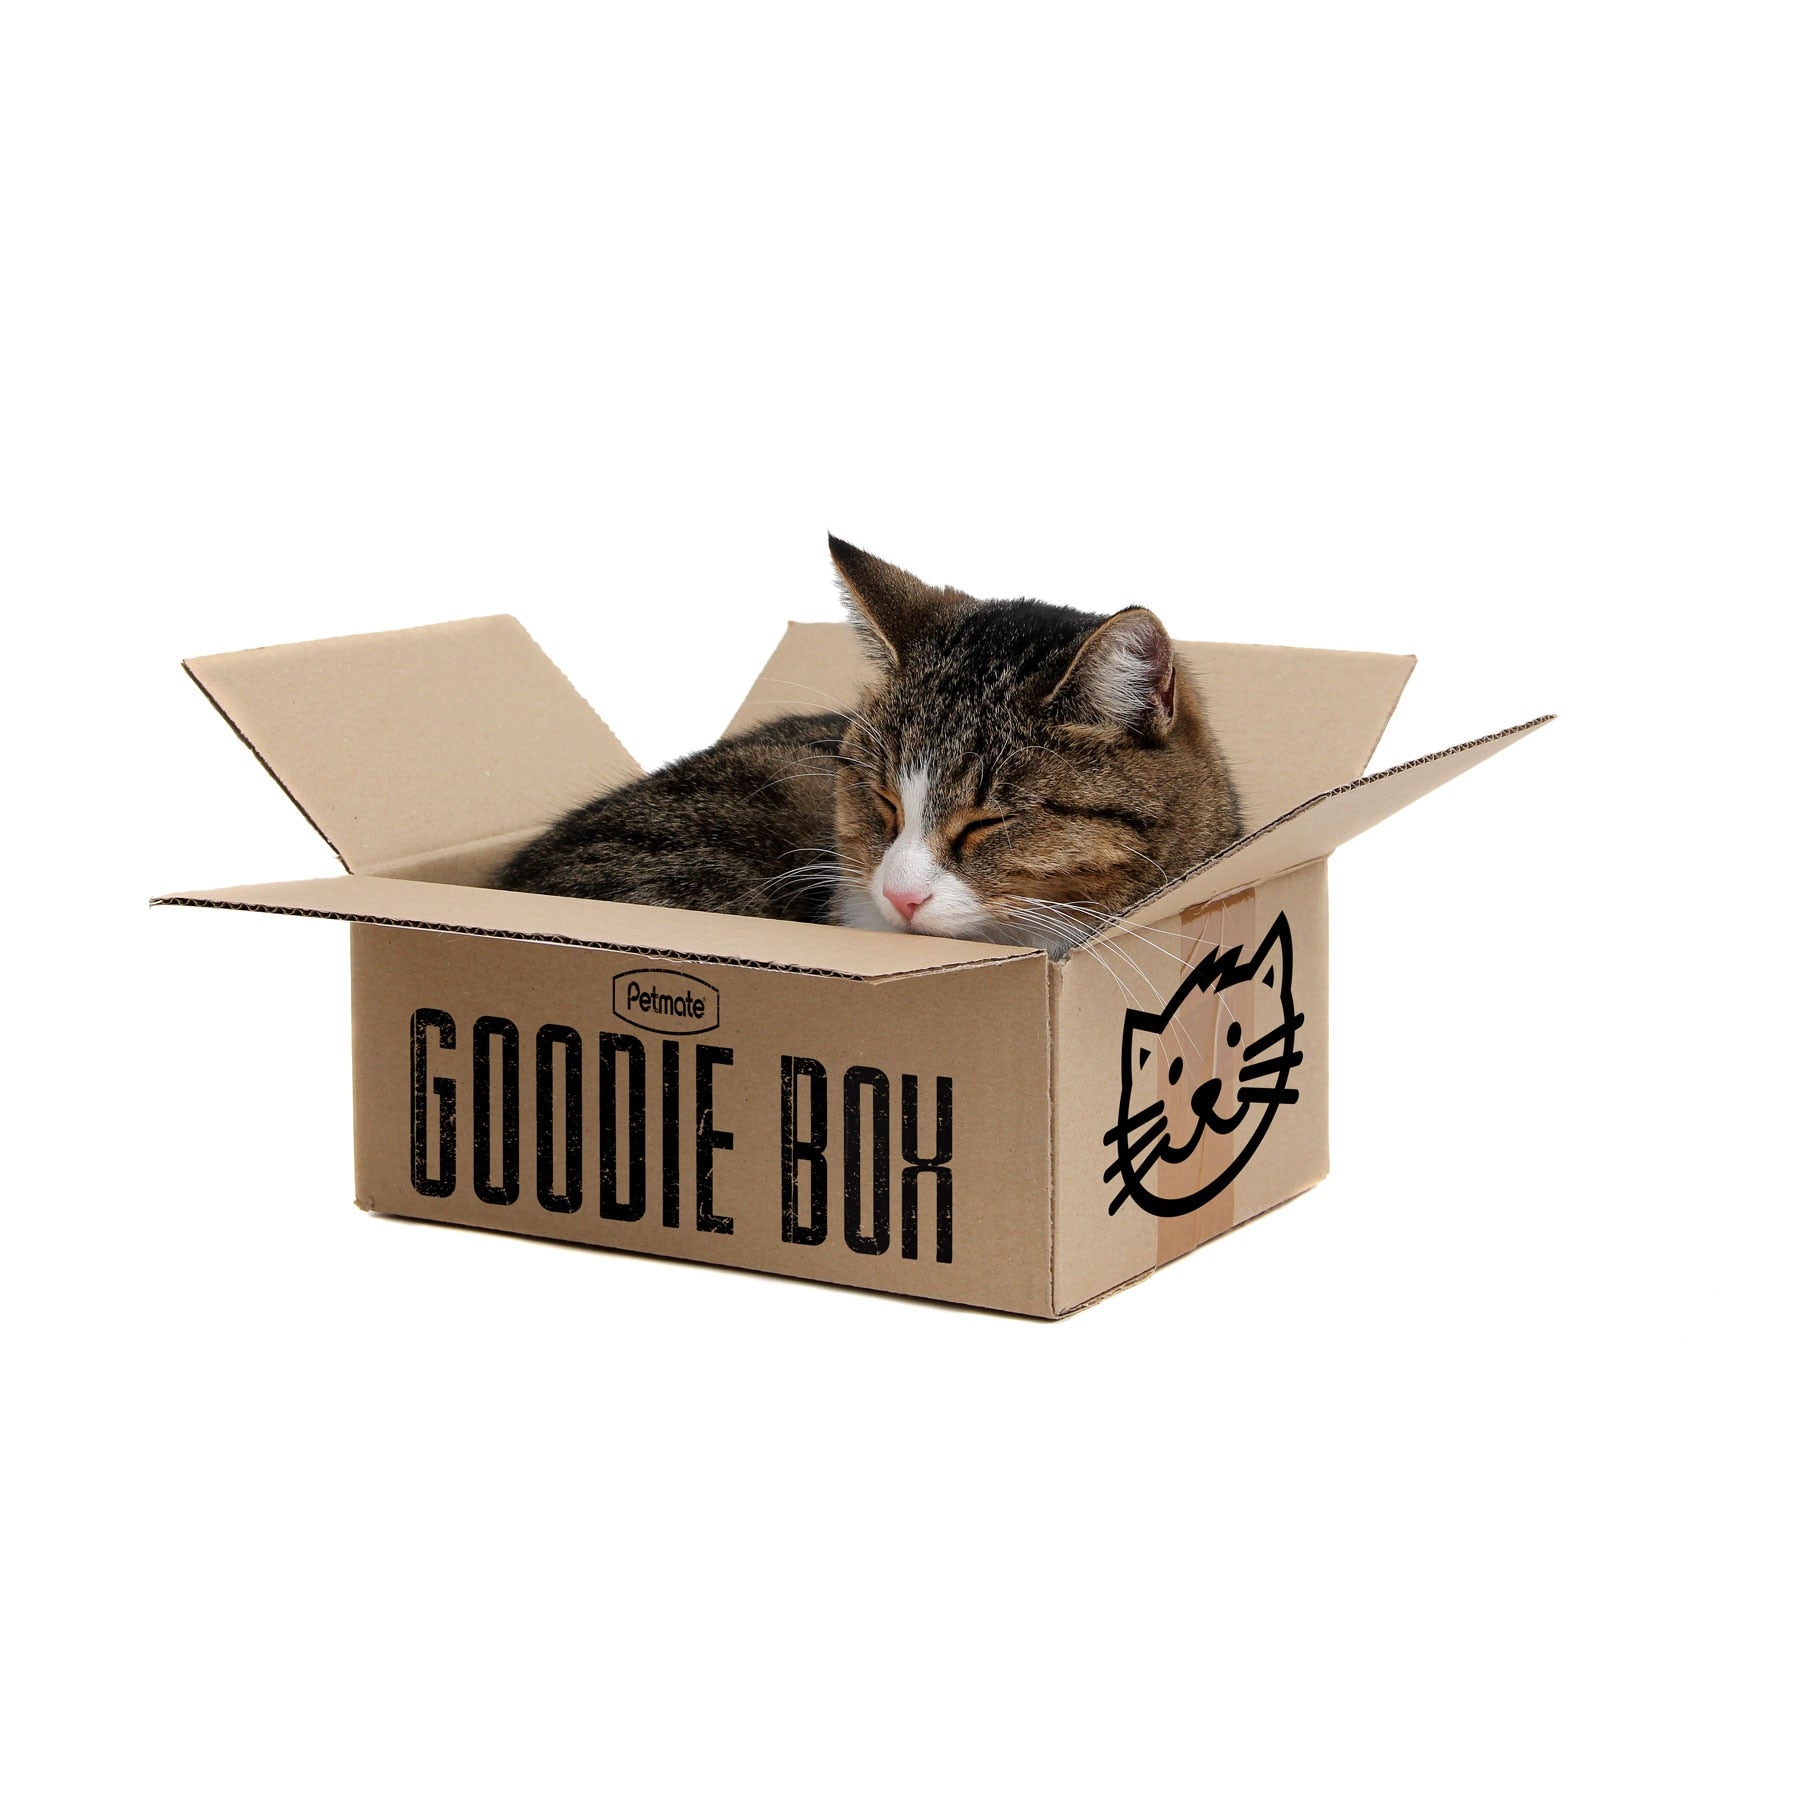 Petmate Goodie Box For Cats